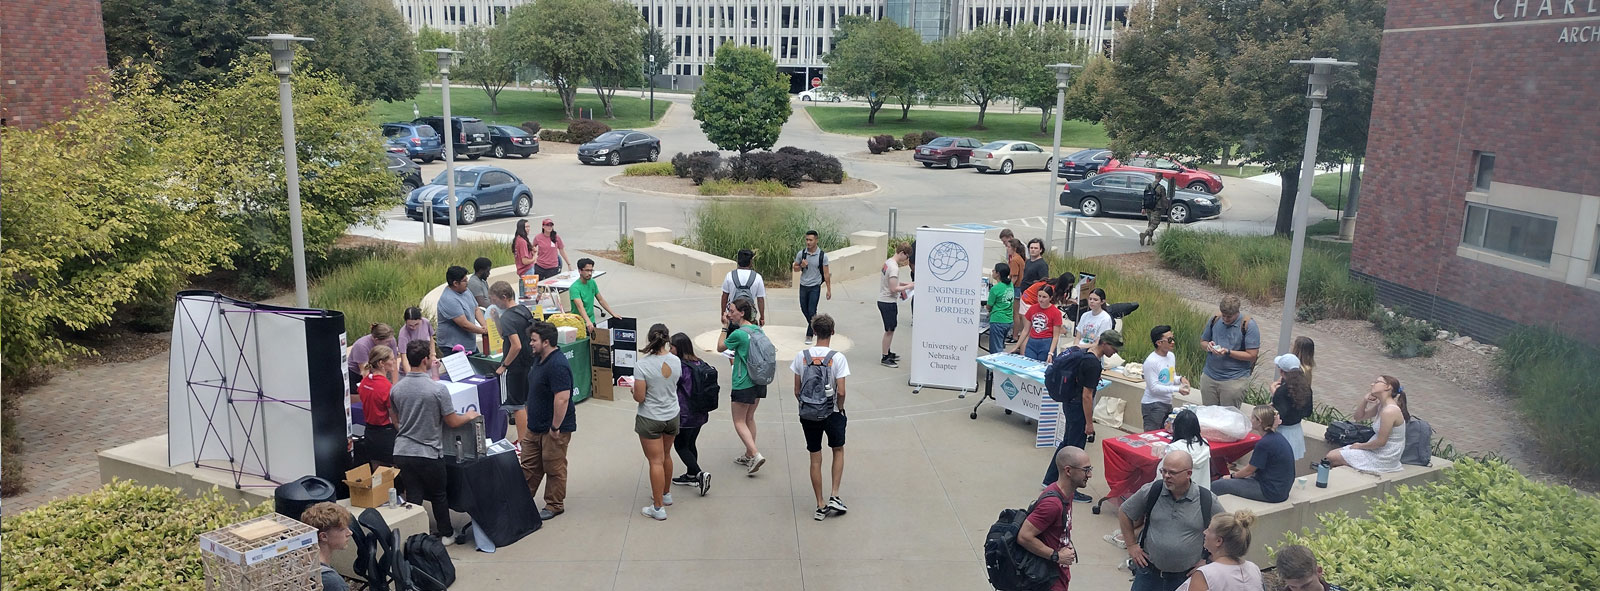 Student groups presenting outside the Peter Kiewit Institute.